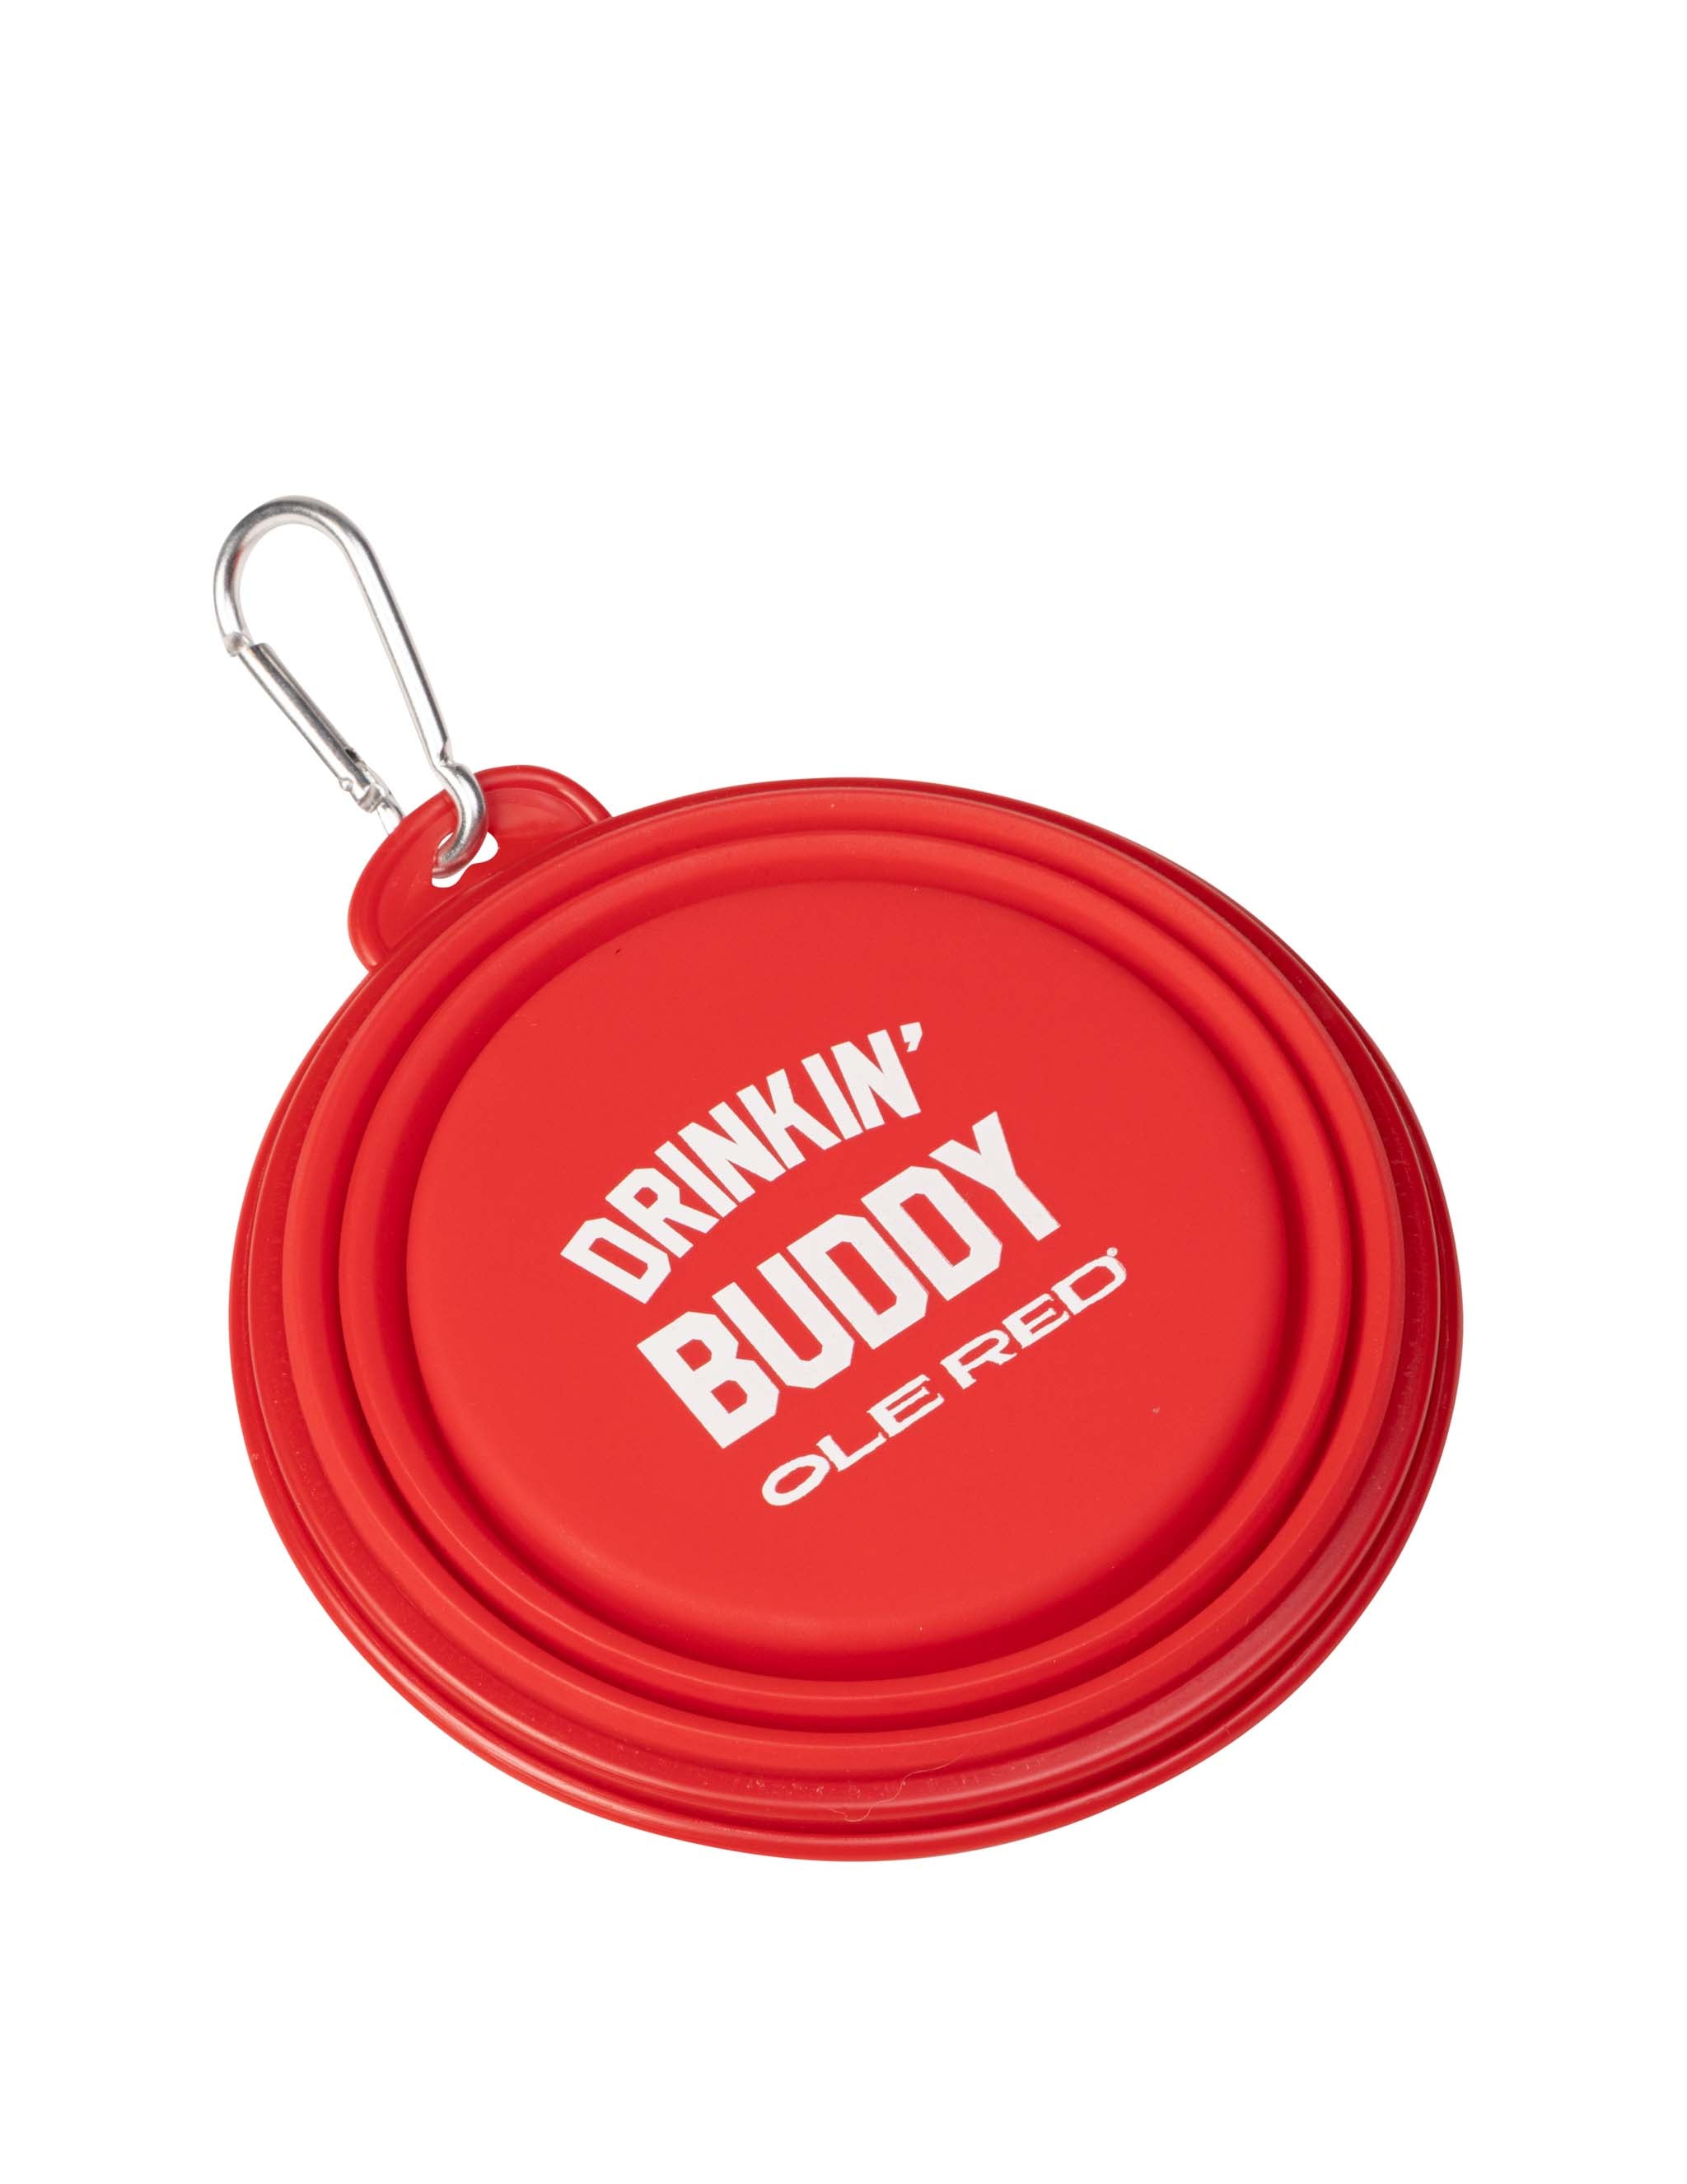 Ole Red Collapsible Pet Bowl - Drinkin' Buddy